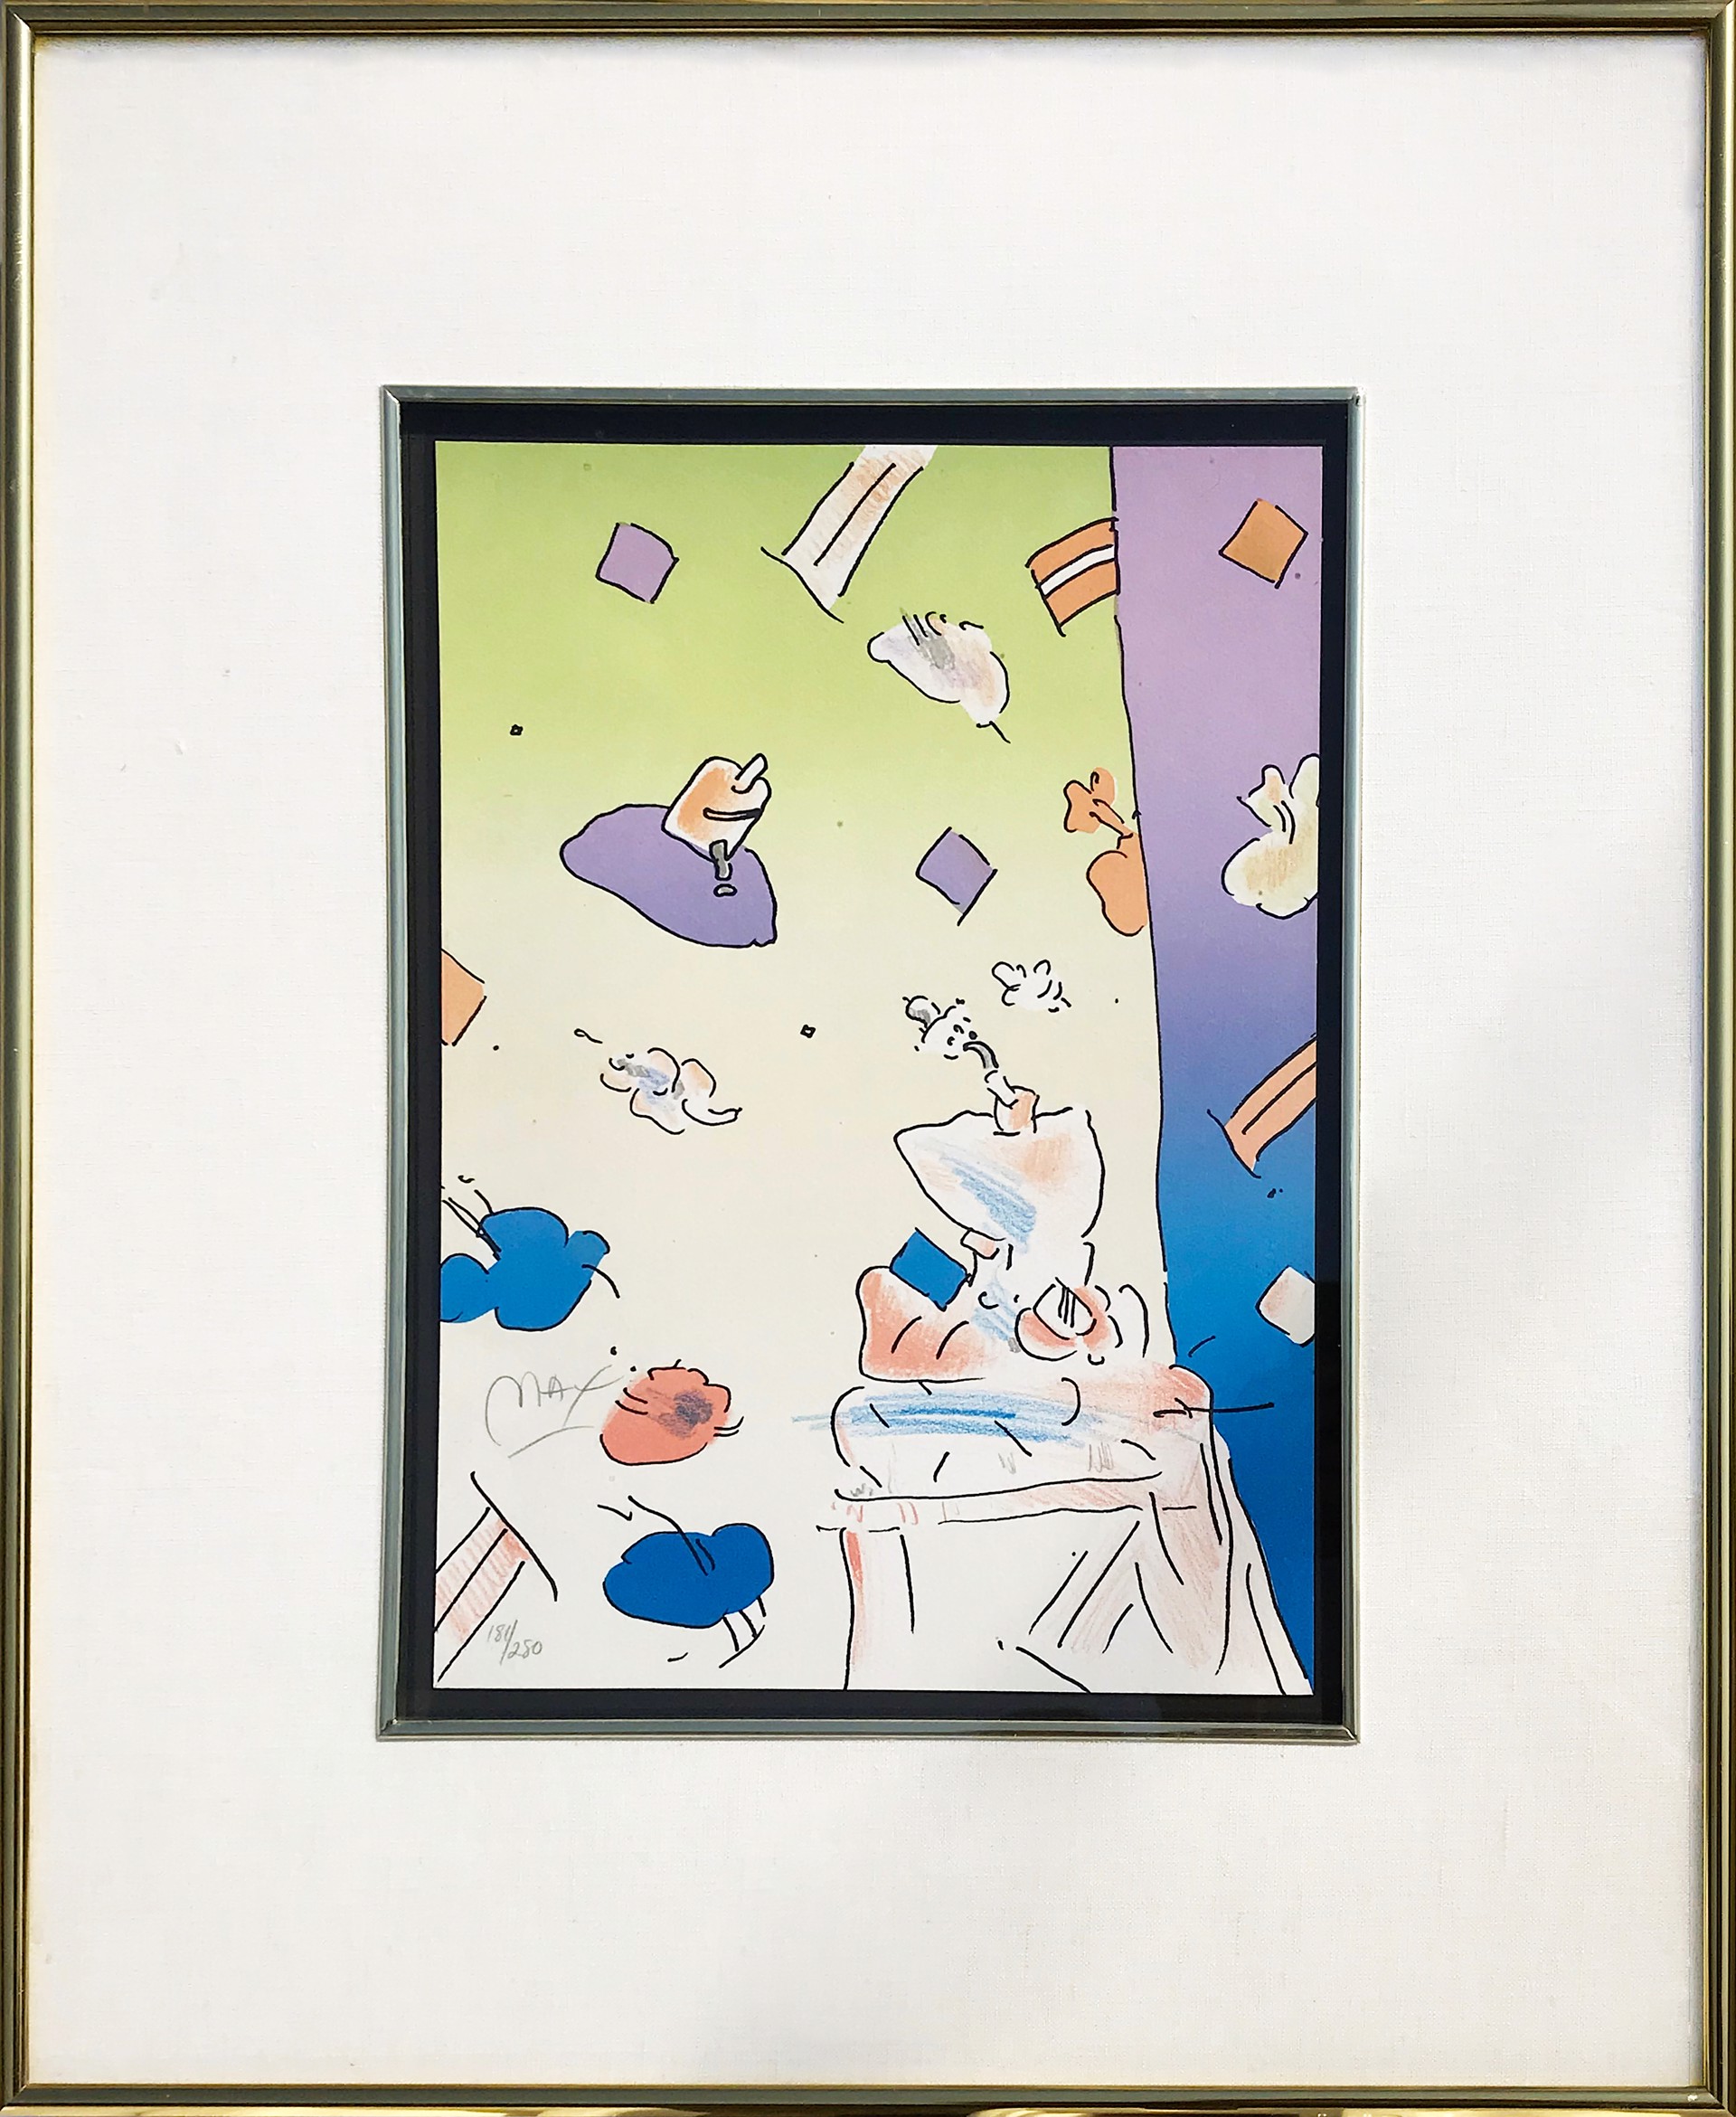 Soft Chair and Wall (Pique Dame Suite) by Peter Max